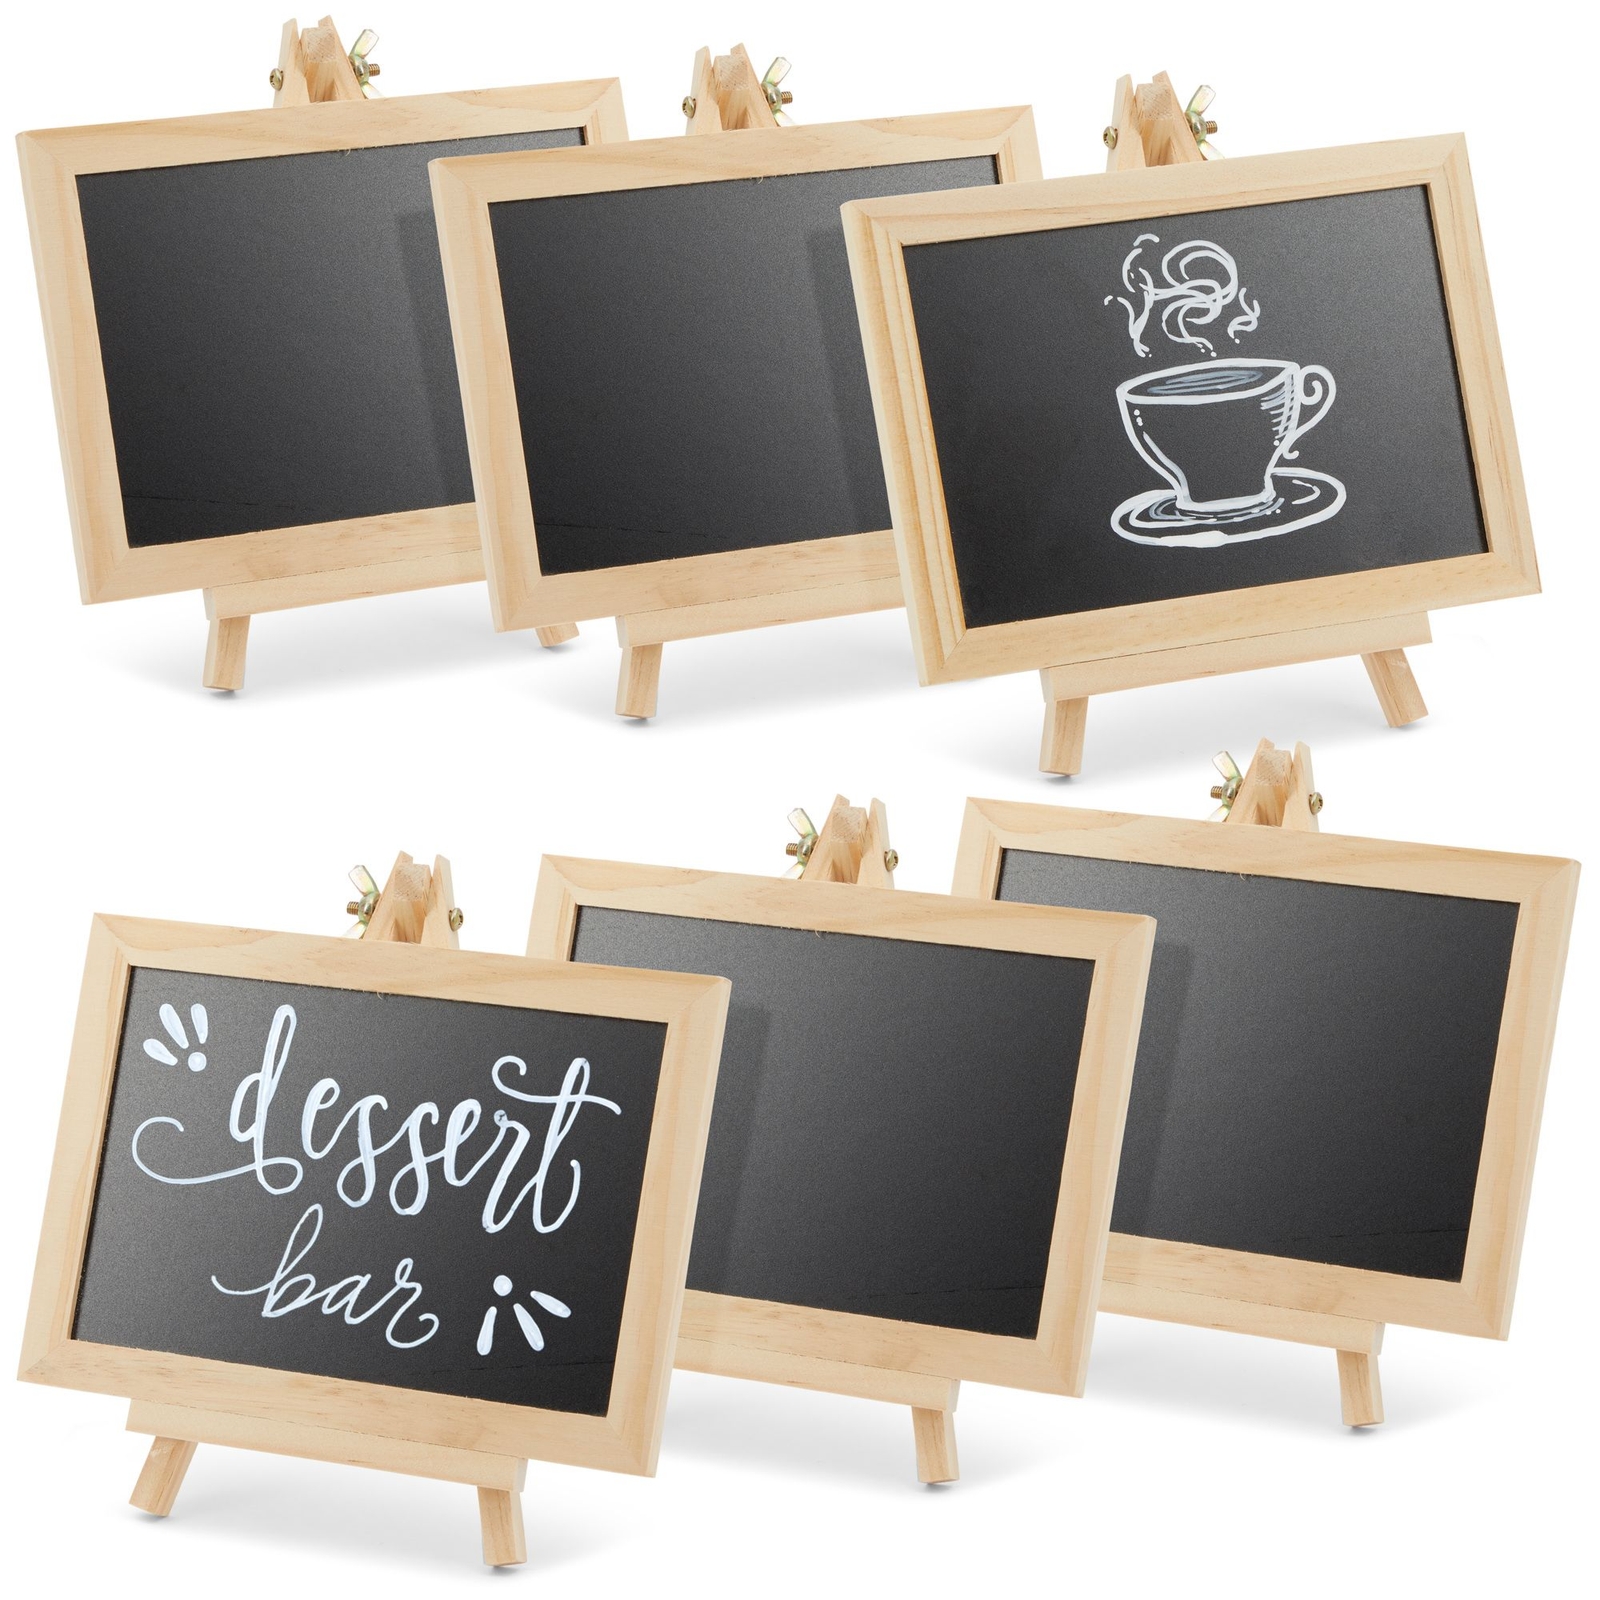 6-Pack Mini Chalkboard Signs with Easel Stand for Table Decorations,  Restaurant Food Display, Message Boards, Small Business, Wedding, Banquet,  Coffee Shop (7x7x4 in)